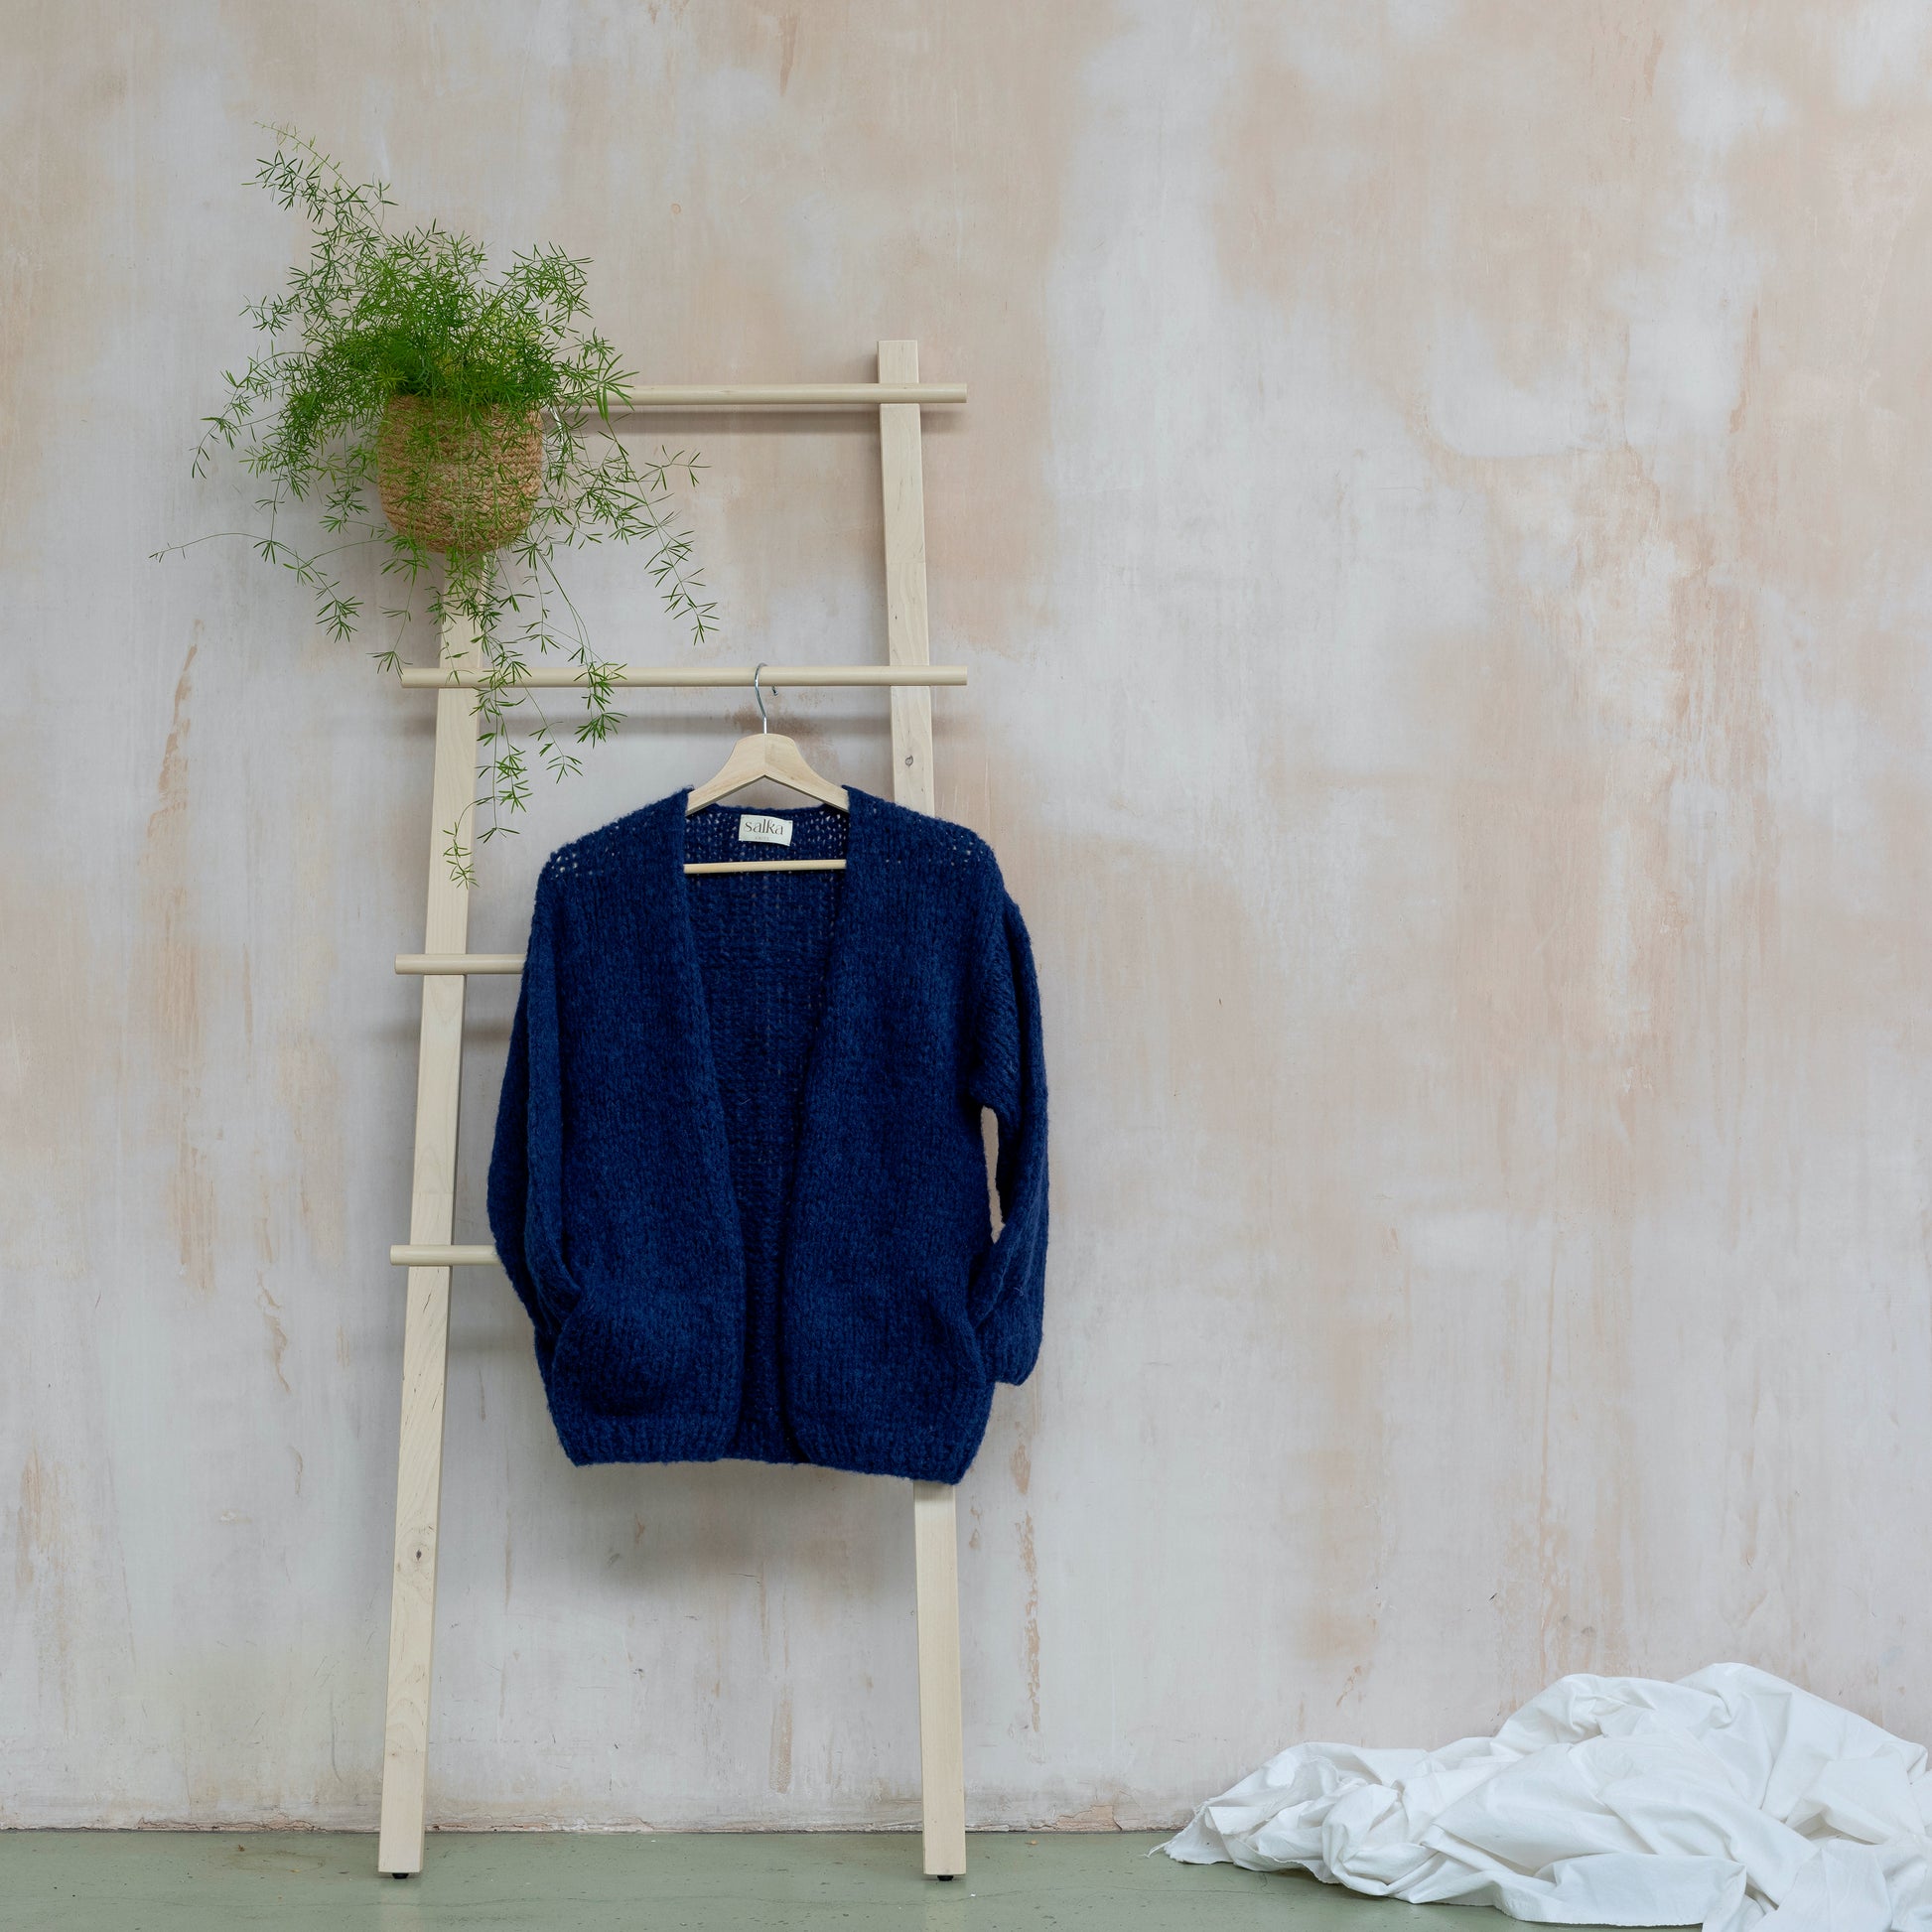 Dark navy coloured knitted alpaca wool cardigan hanging on wooden steps. Beautiful-one-of-a-kind item